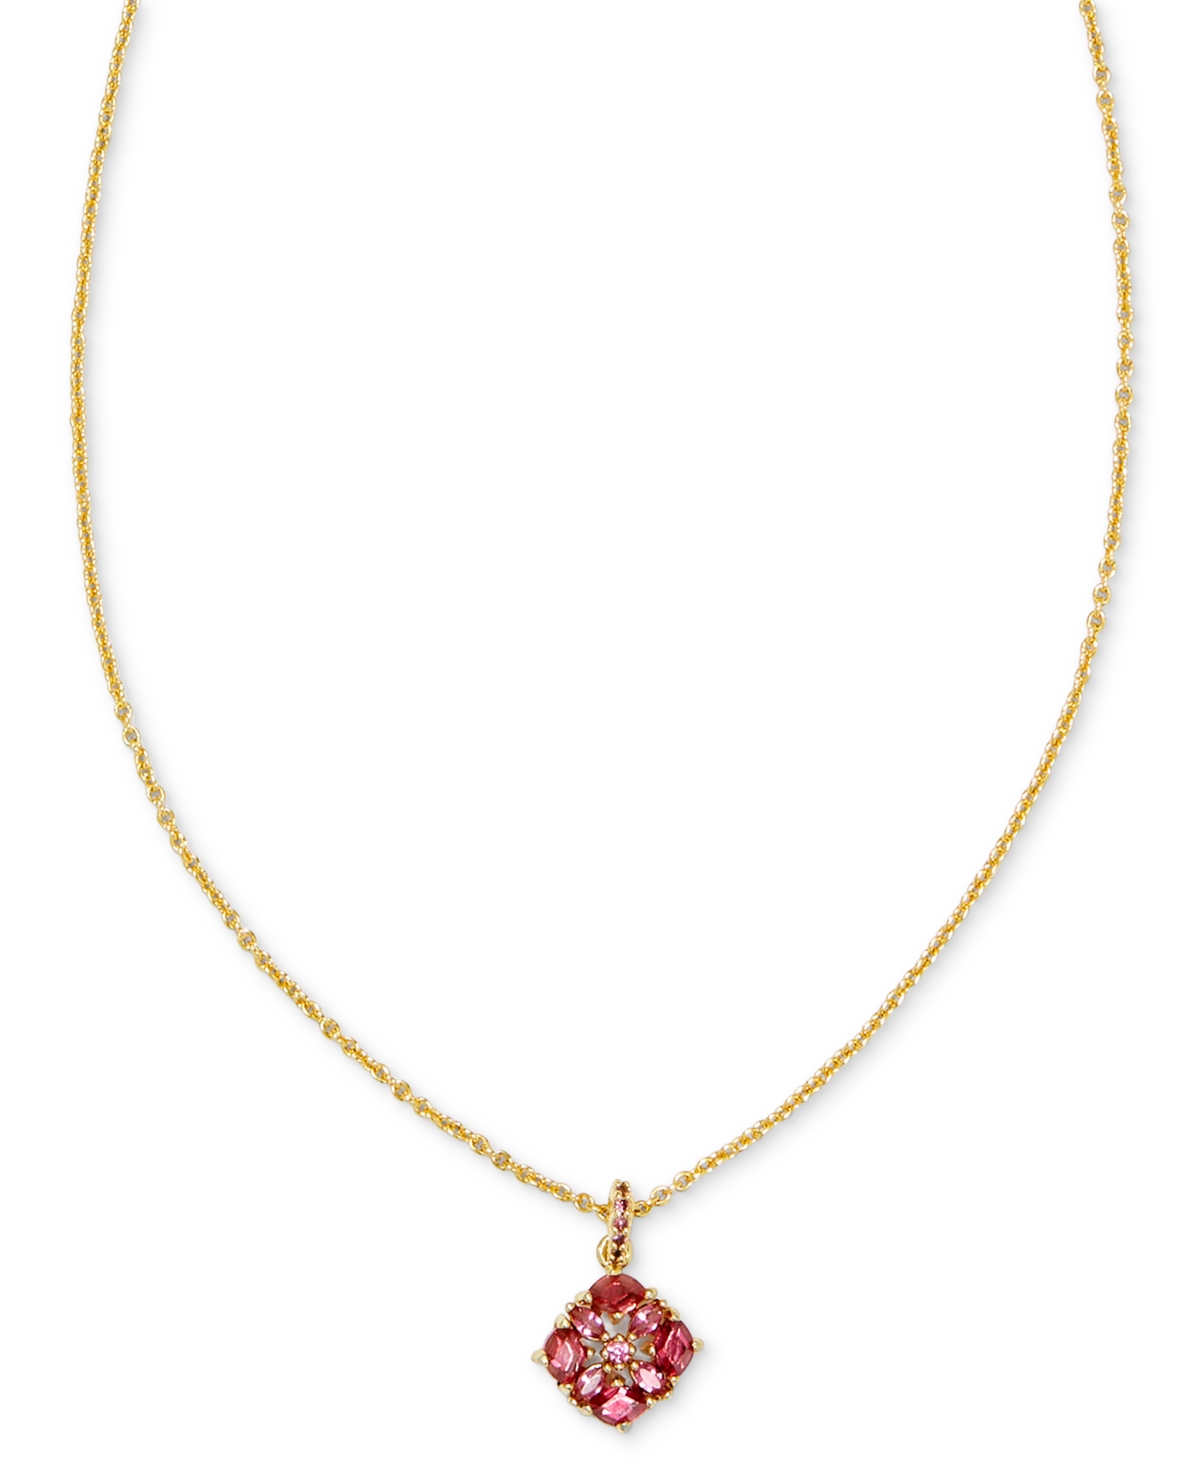 Kendra Scott 14k Gold-plated Mixed Cubic Zirconia 19" Adjustable Pendant Necklace In Pink Mix